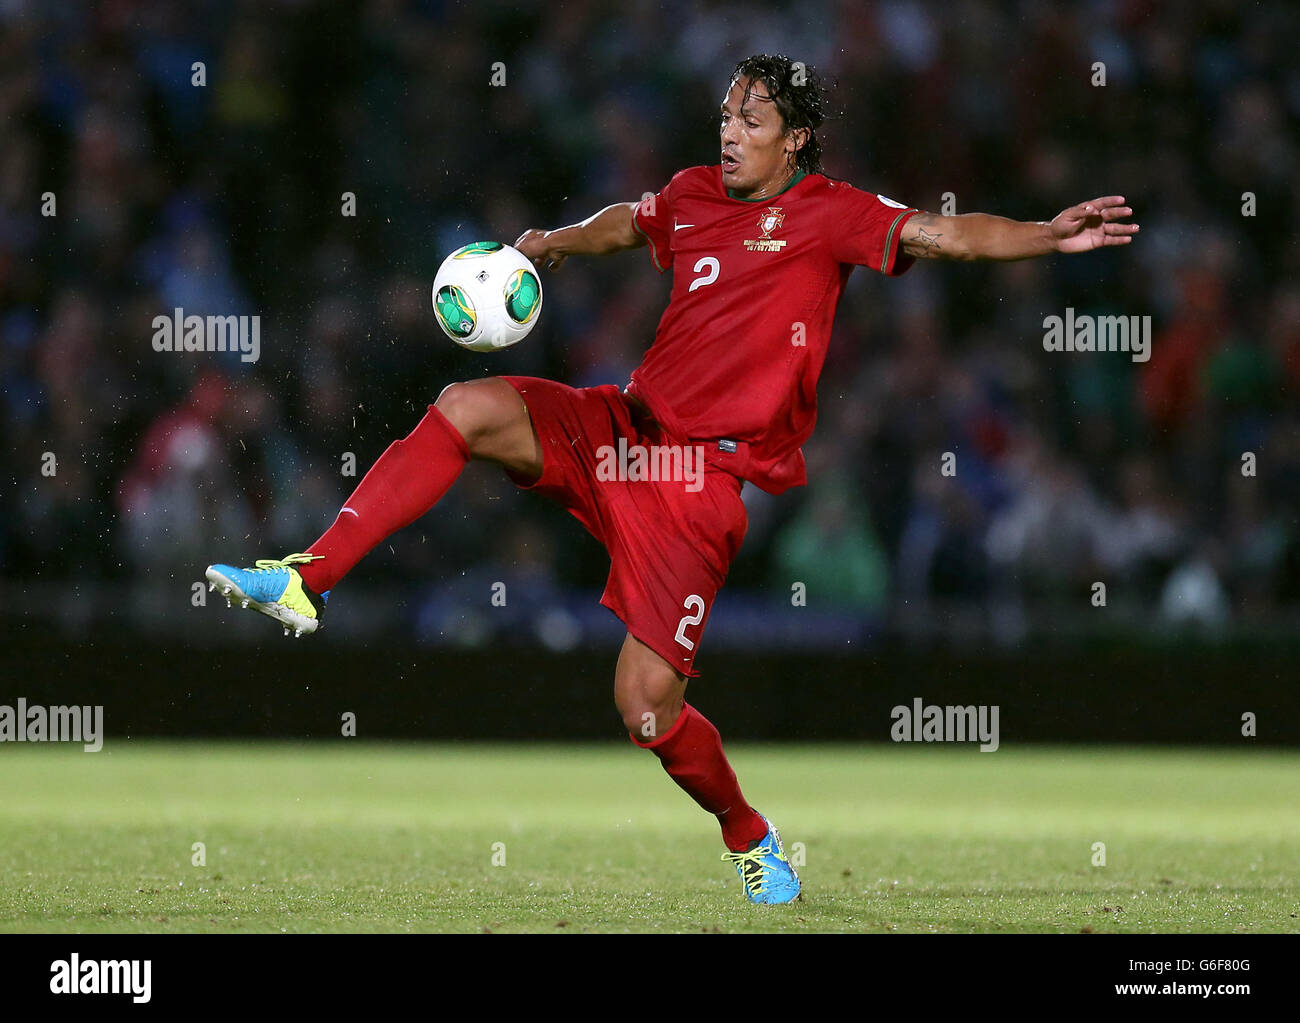 Soccer - 2014 World Cup Qualifier - Europe - Group F - Northern Ireland v Portugal - Windsor Park. Portugal's Bruno Alves in action Stock Photo